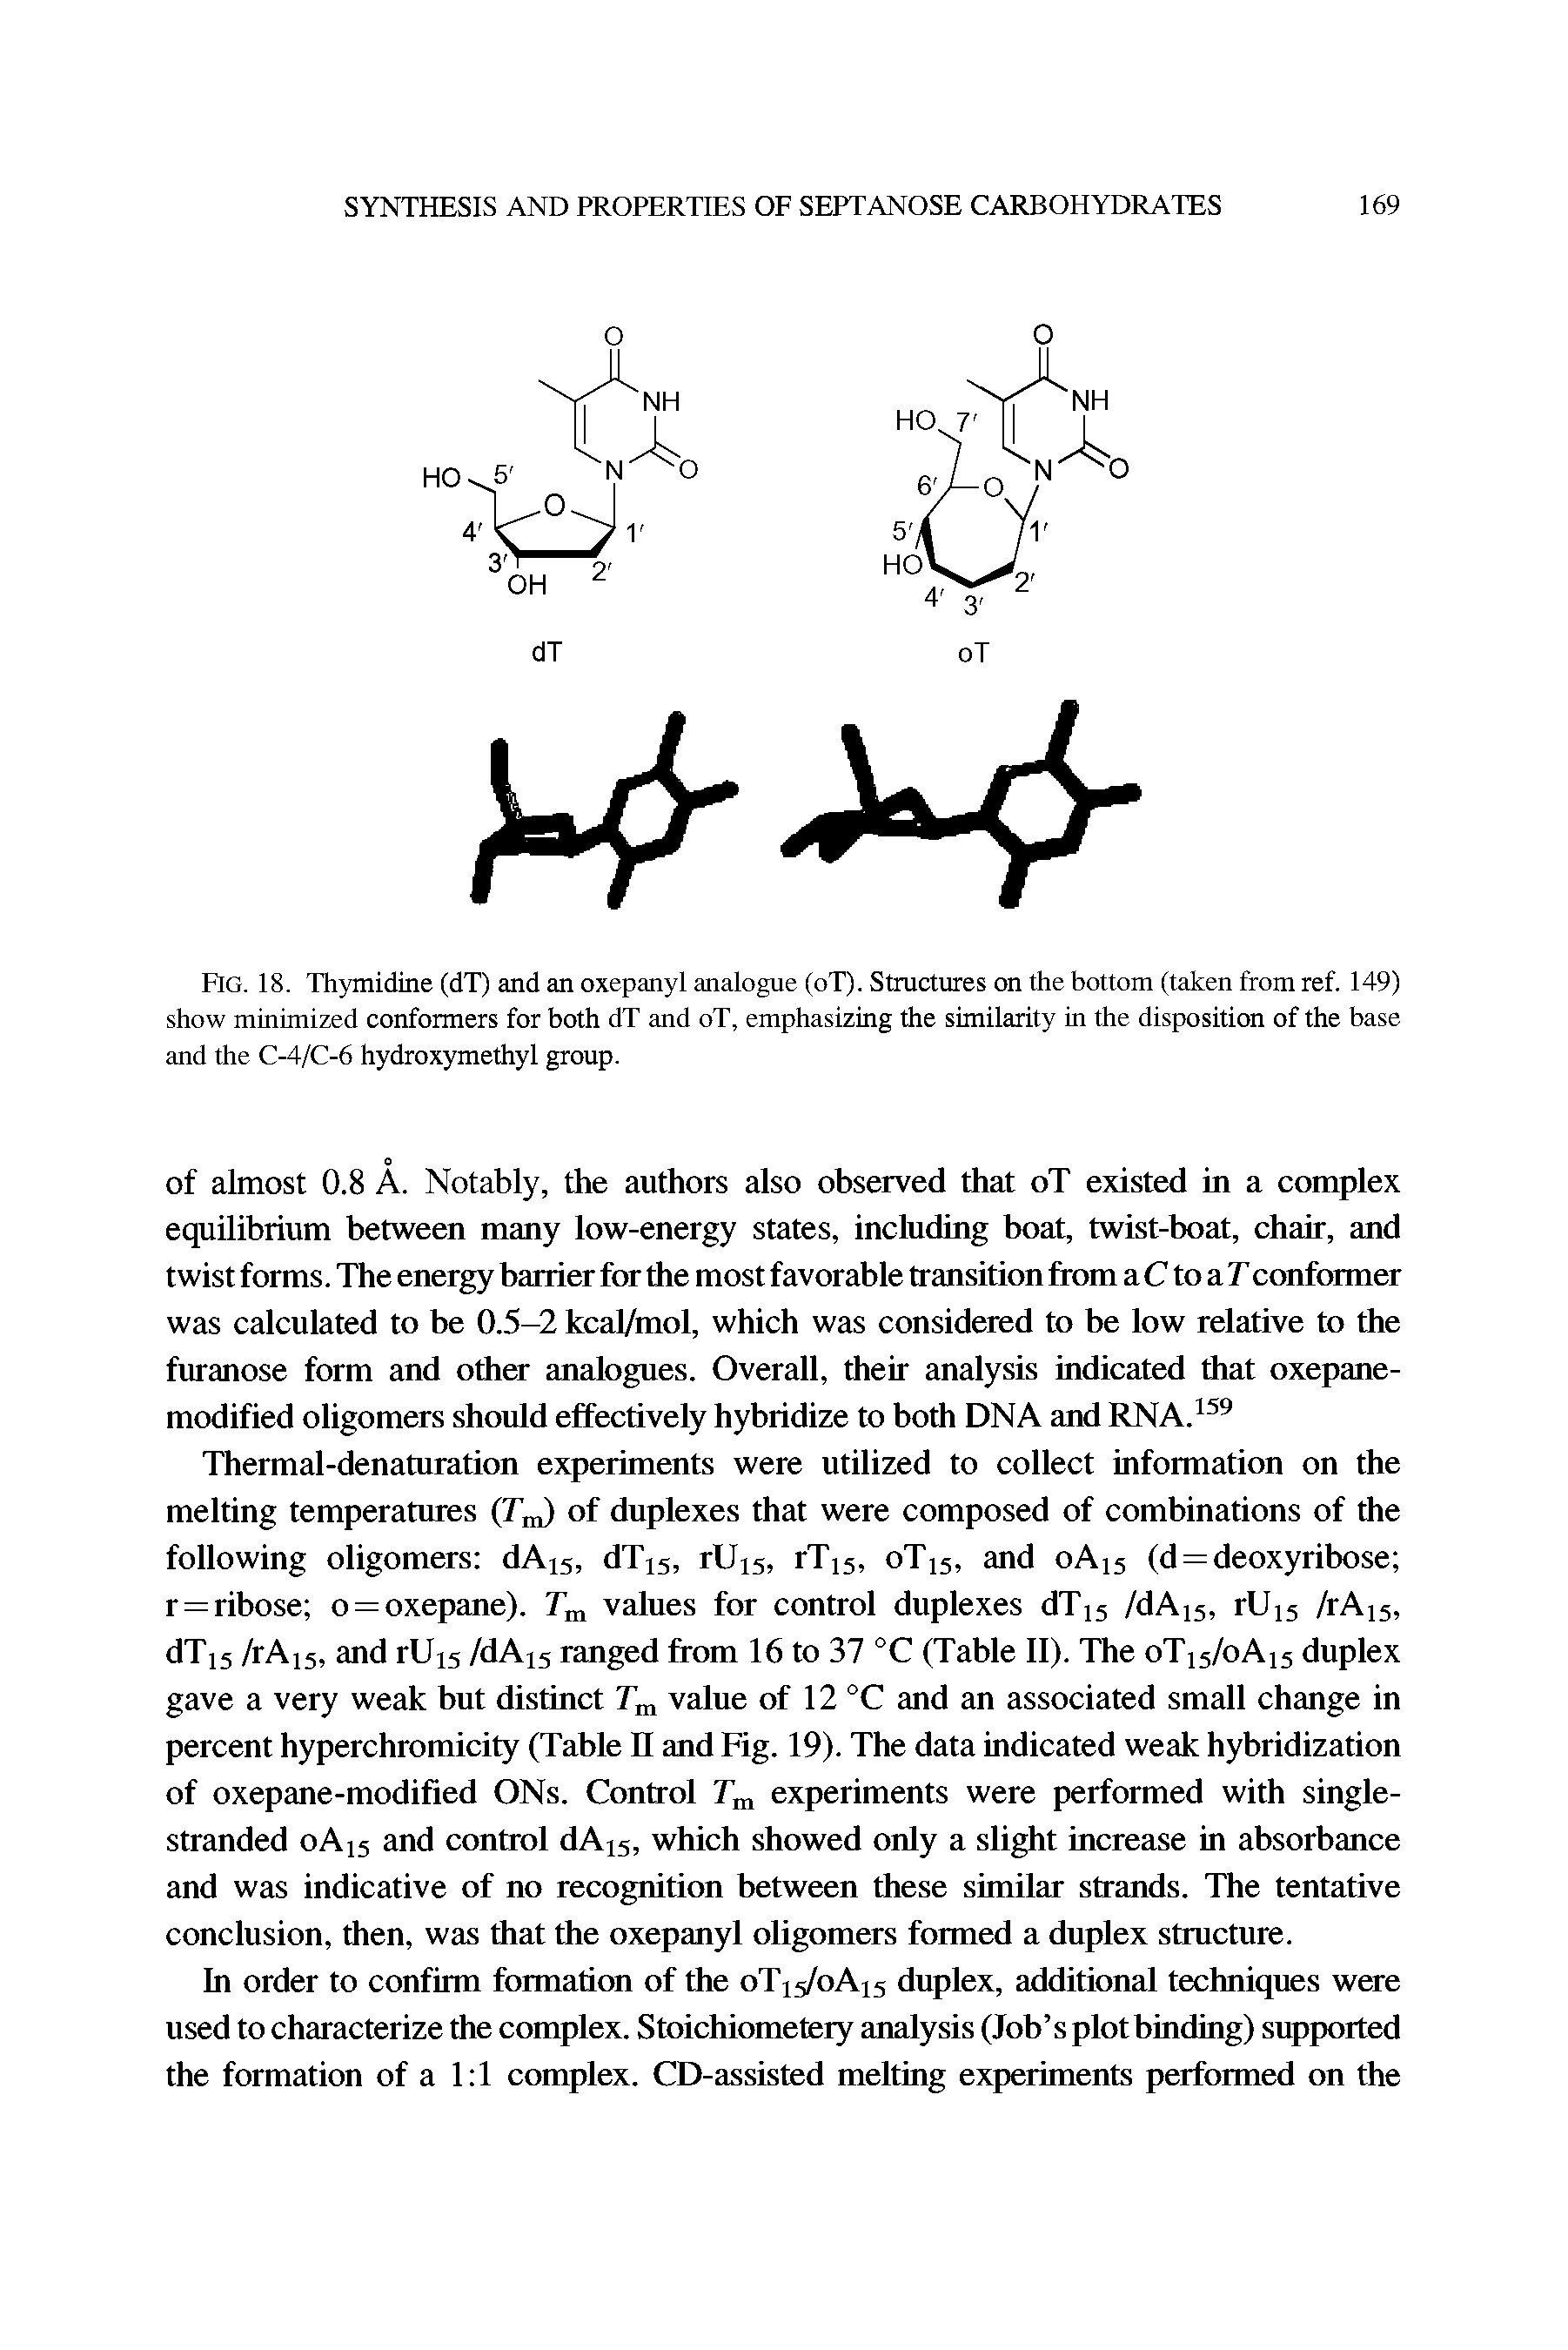 Fig. 18. Thymidine (dT) and an oxepanyl analogue (oT). Structures on the bottom (taken from ref. 149) show minimized conformers for both dT and oT, emphasizing the similarity in the disposition of the base and the C-4/C-6 hydroxymethyl group.